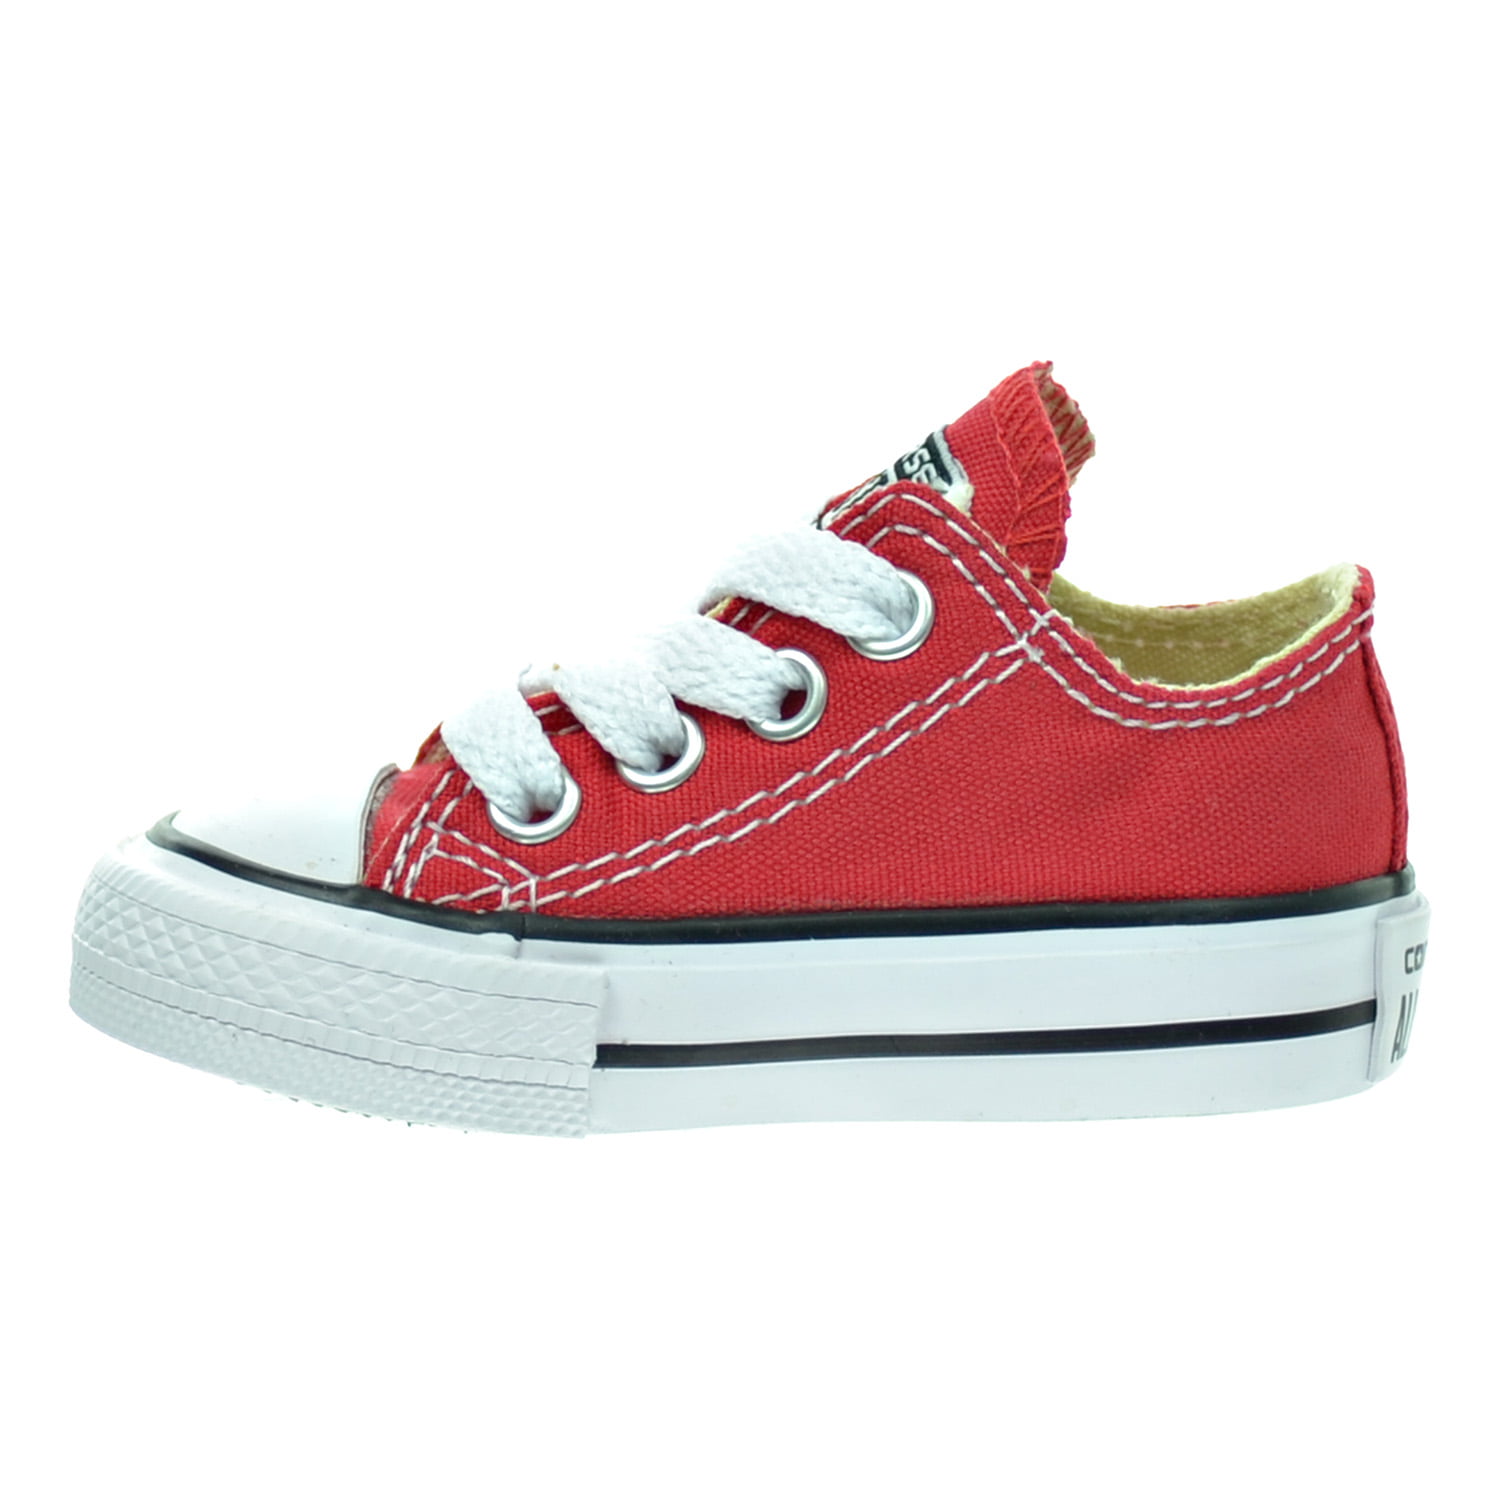 Nathaniel Ward Minefelt Påstand Converse Chuck Taylor All Star Low Top Infants/Toddlers Shoes Red 7j236 -  Walmart.com